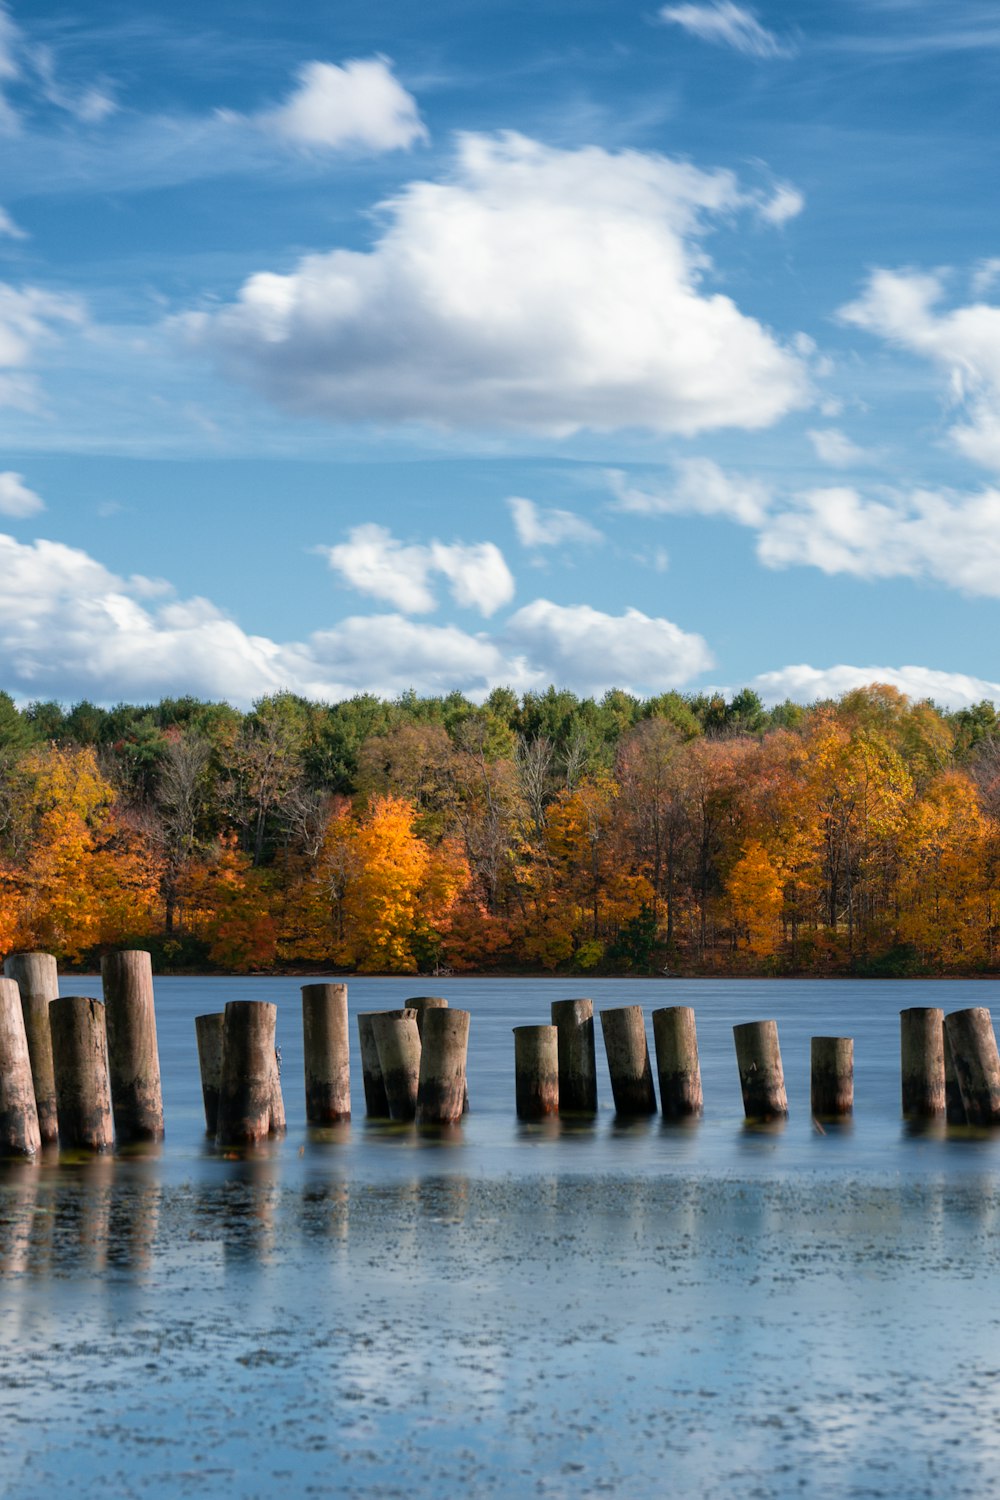 brown wooden posts on body of water near green and yellow trees under blue and white